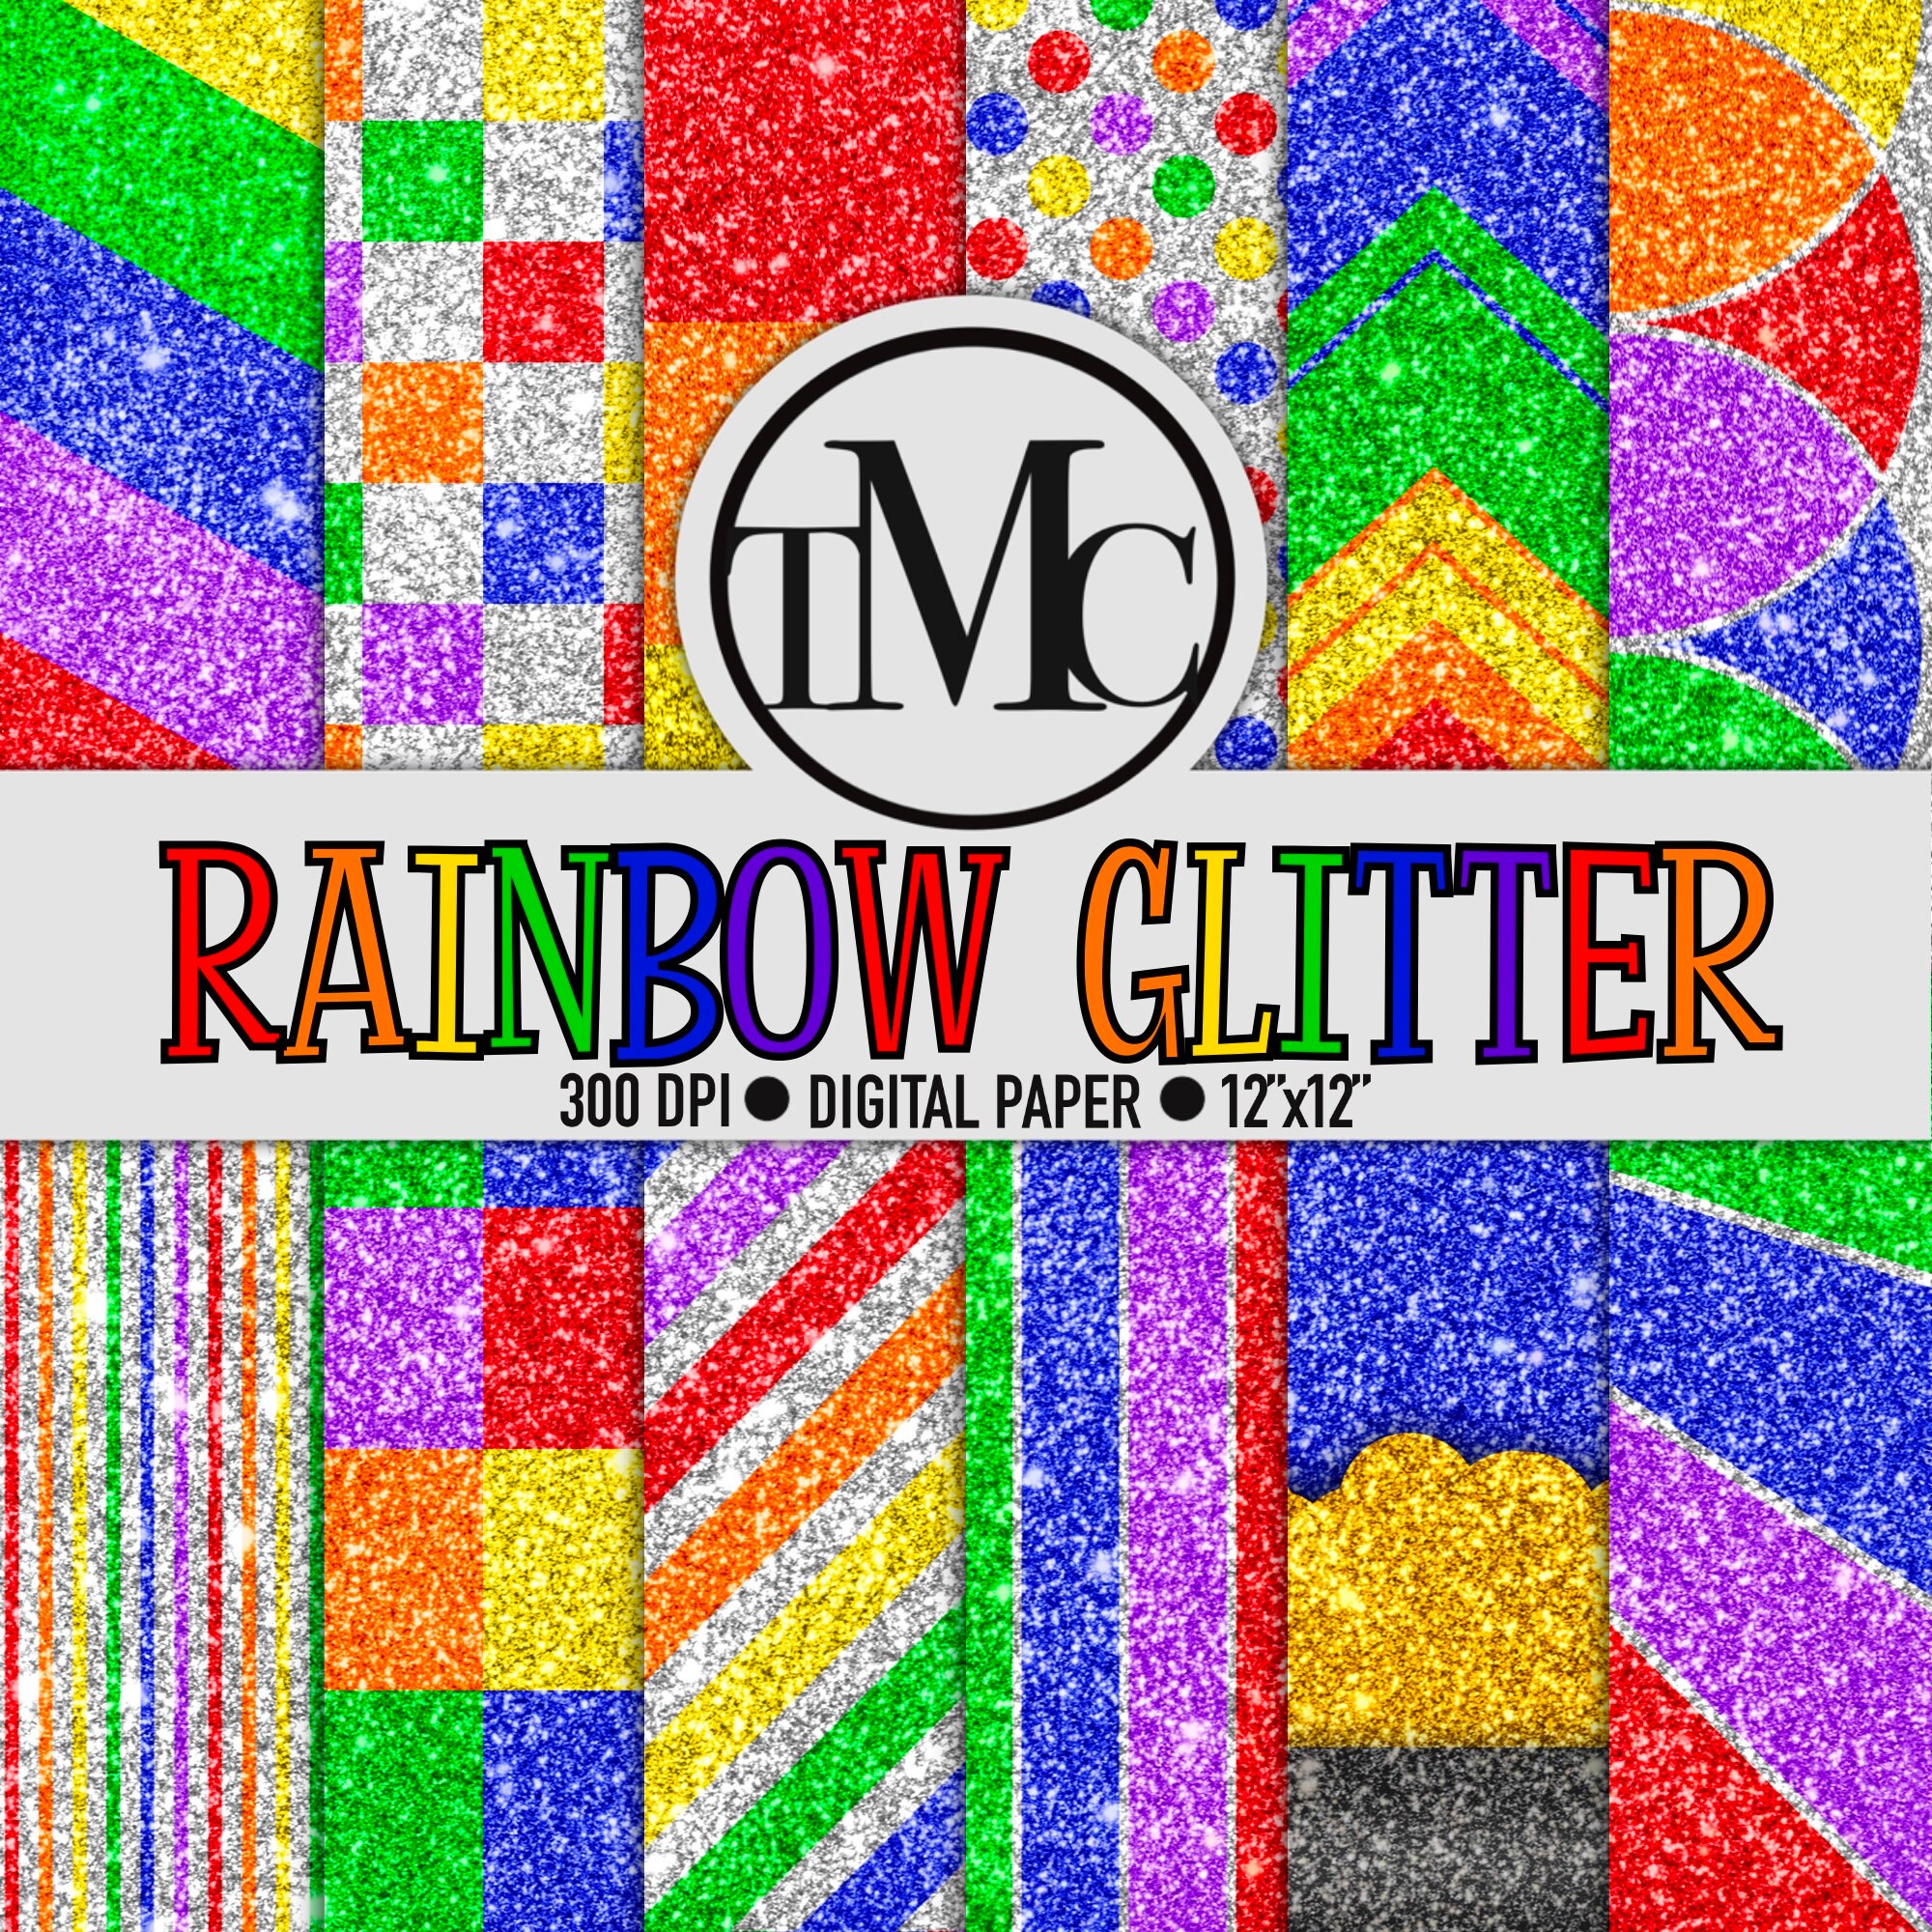 Rainbow Confetti Digital Paper Pack, Rainbow Paper, Scrapbook Paper,  Confetti, Background, Party, Instant Download, Commercial Use 